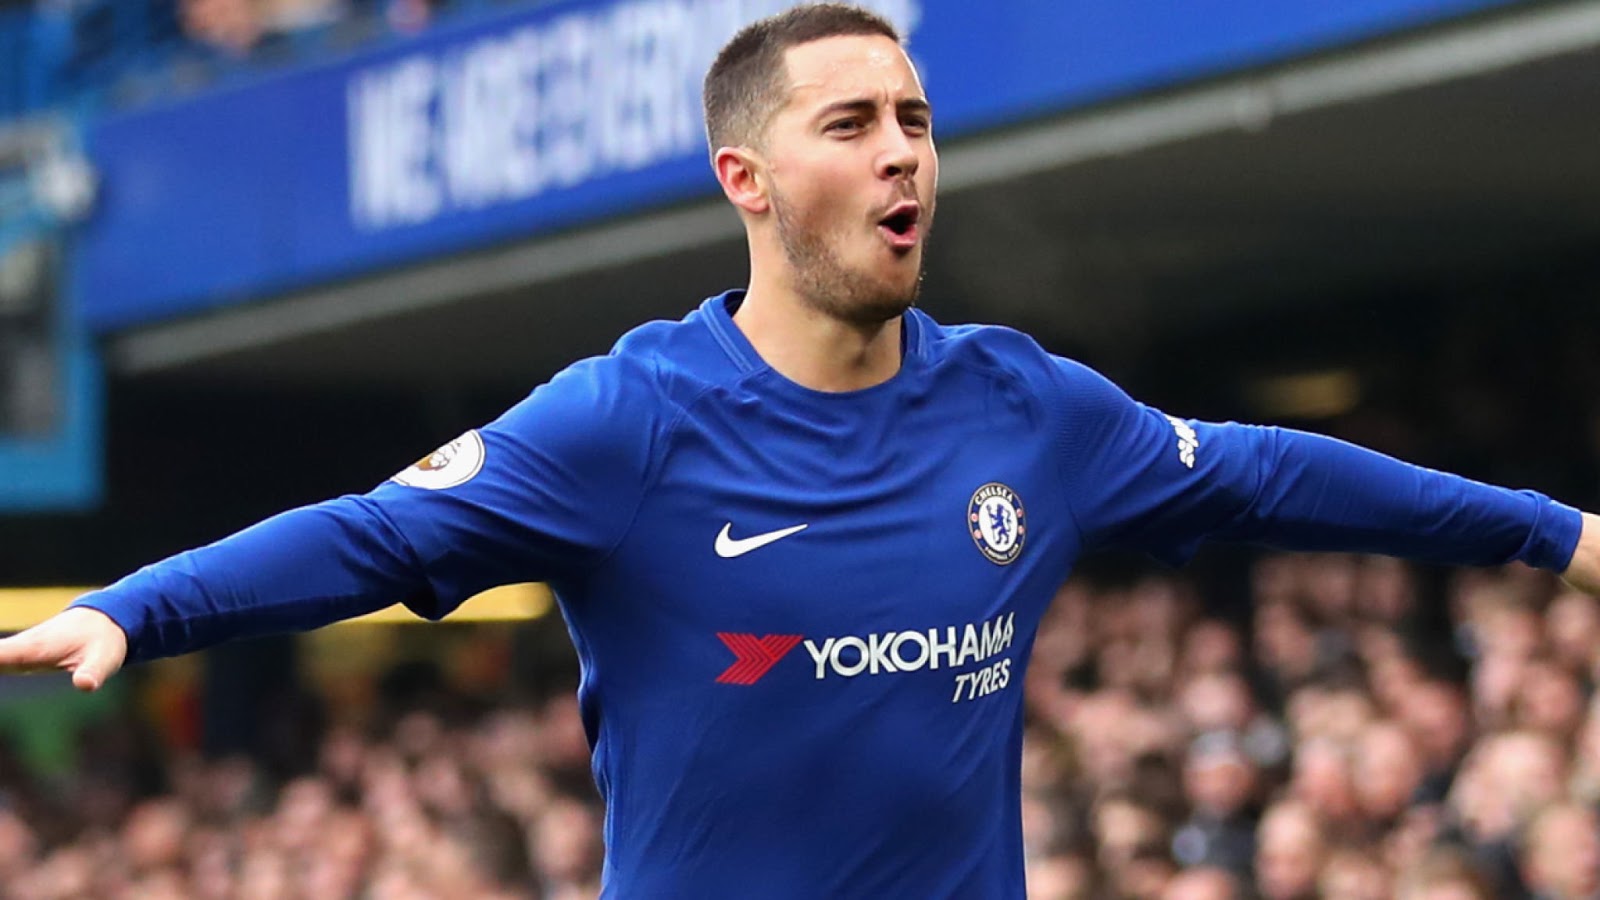 Hazard And Real Madrid Have A 16.5 M Euro Pre-Agreement